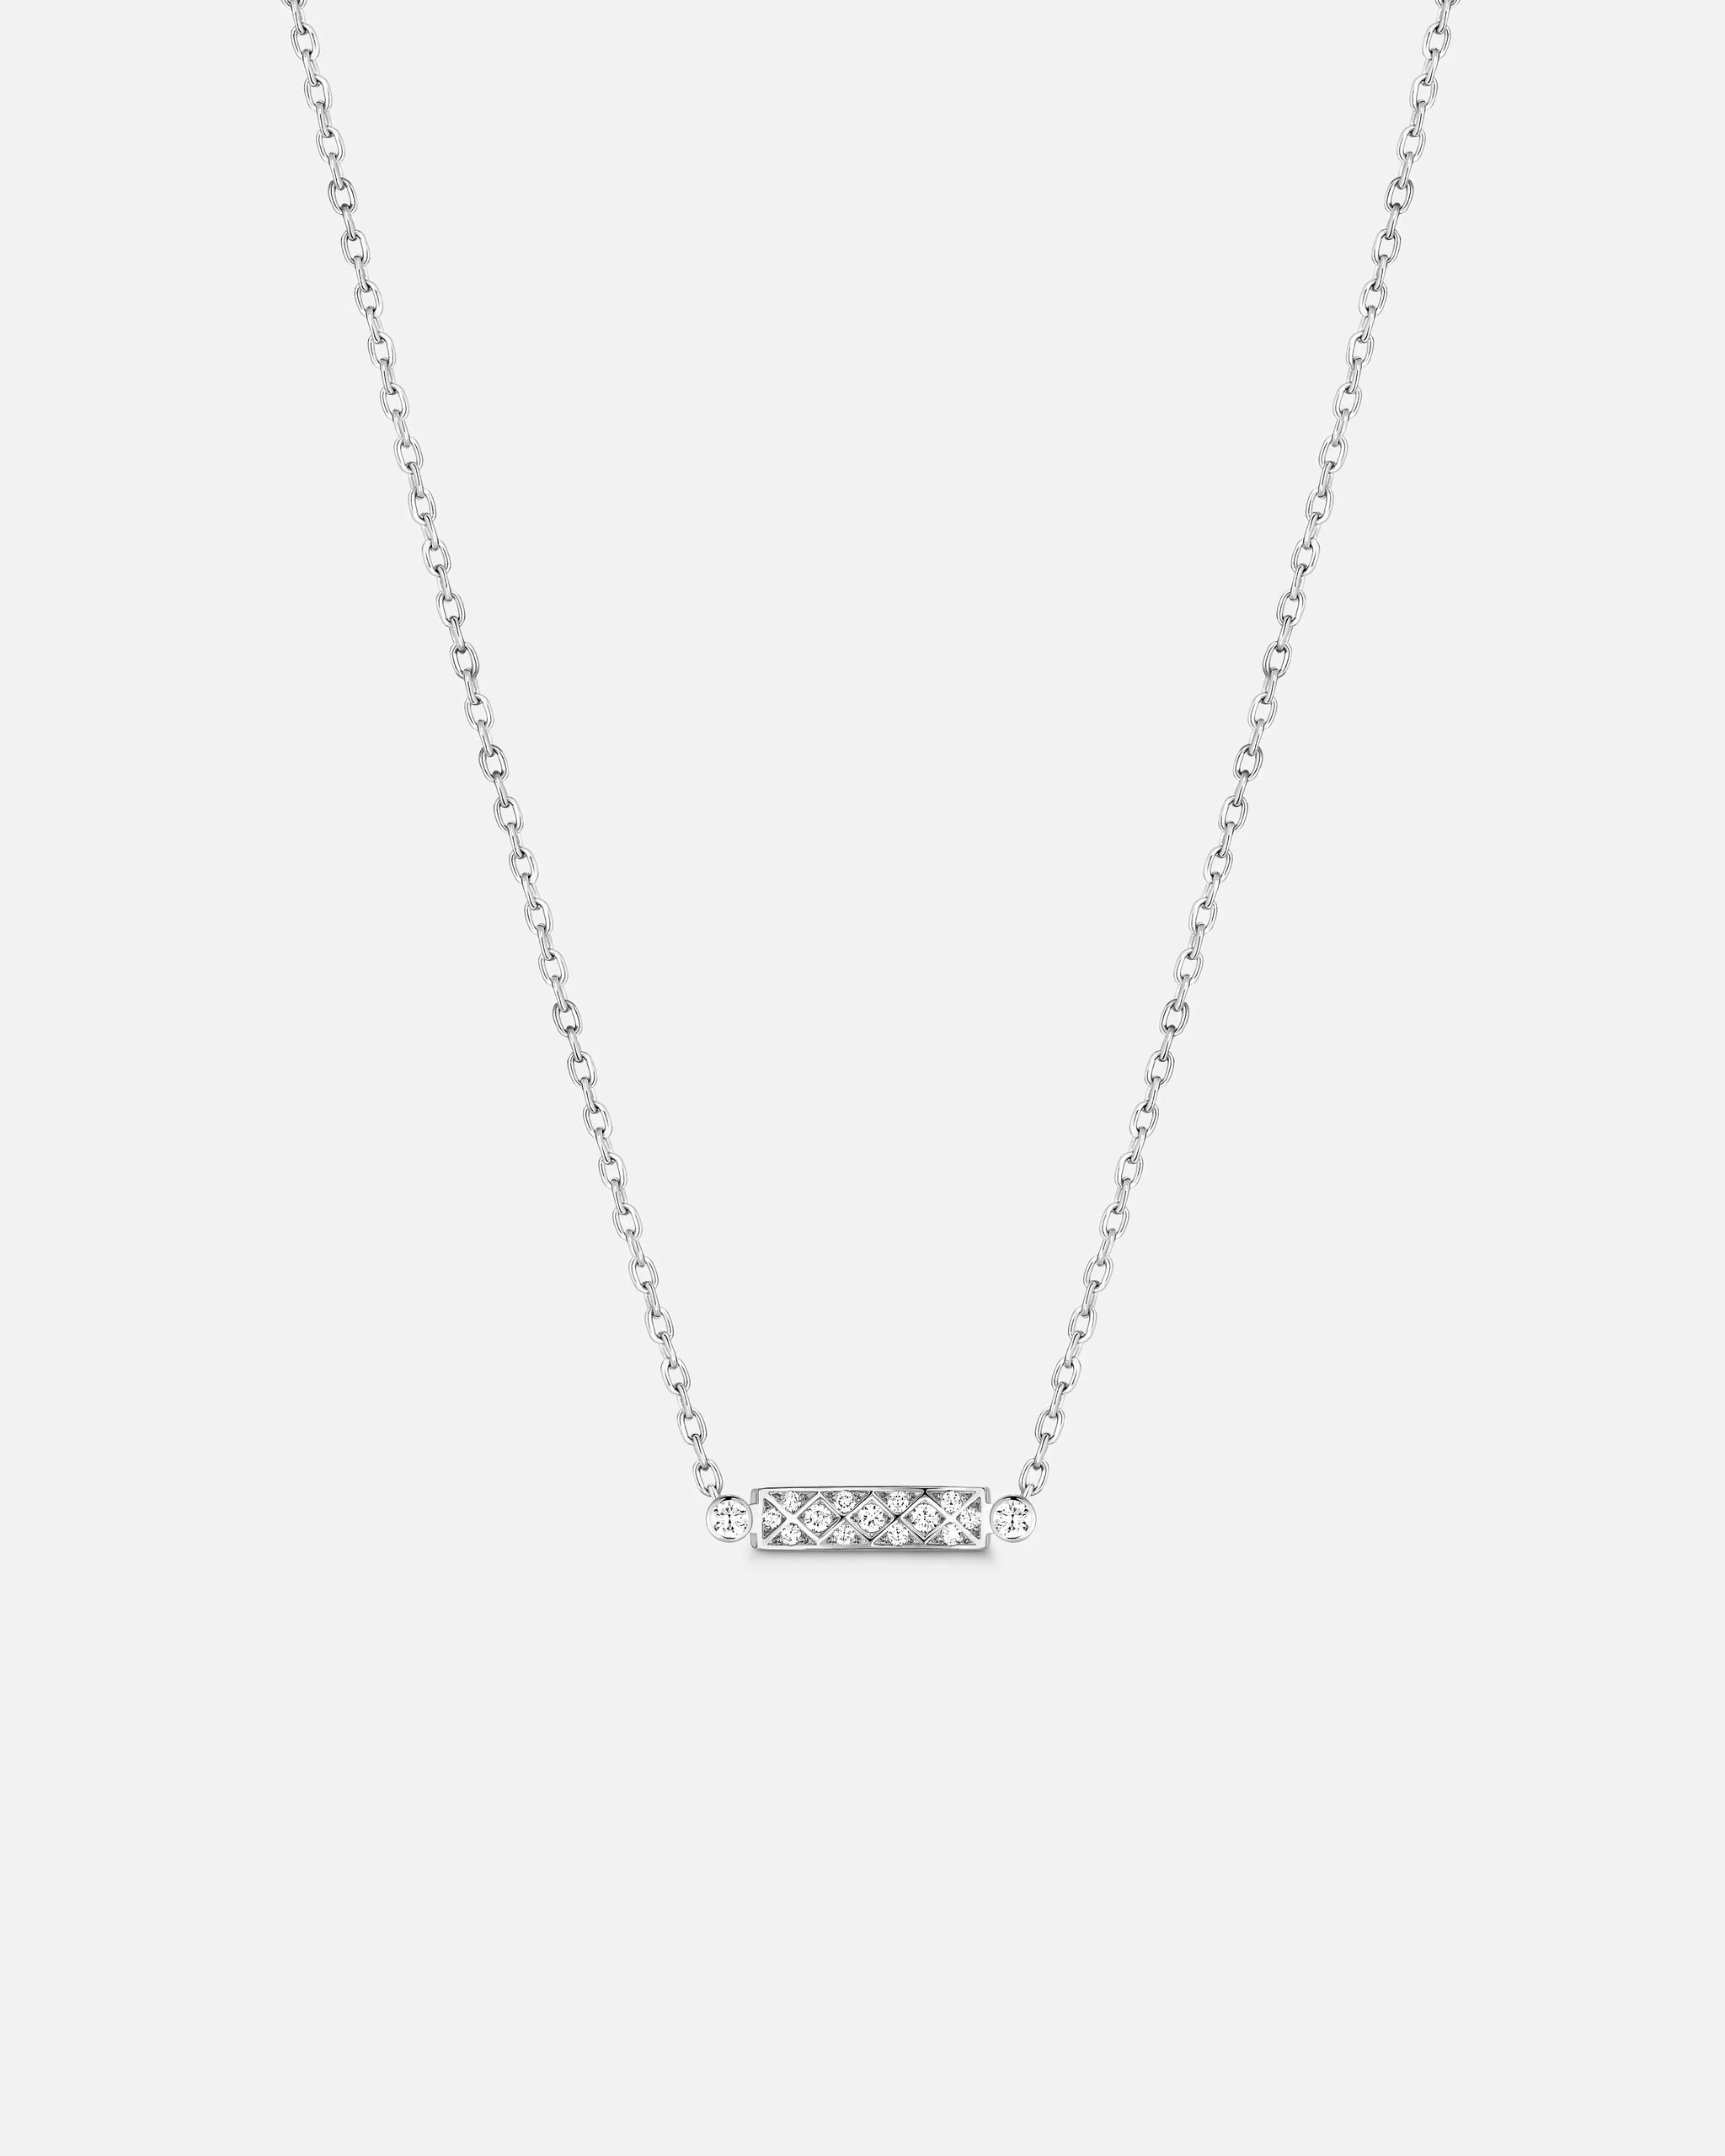 Parisian Stroll Mood Pendant in White Gold - 1 - Nouvel Heritage